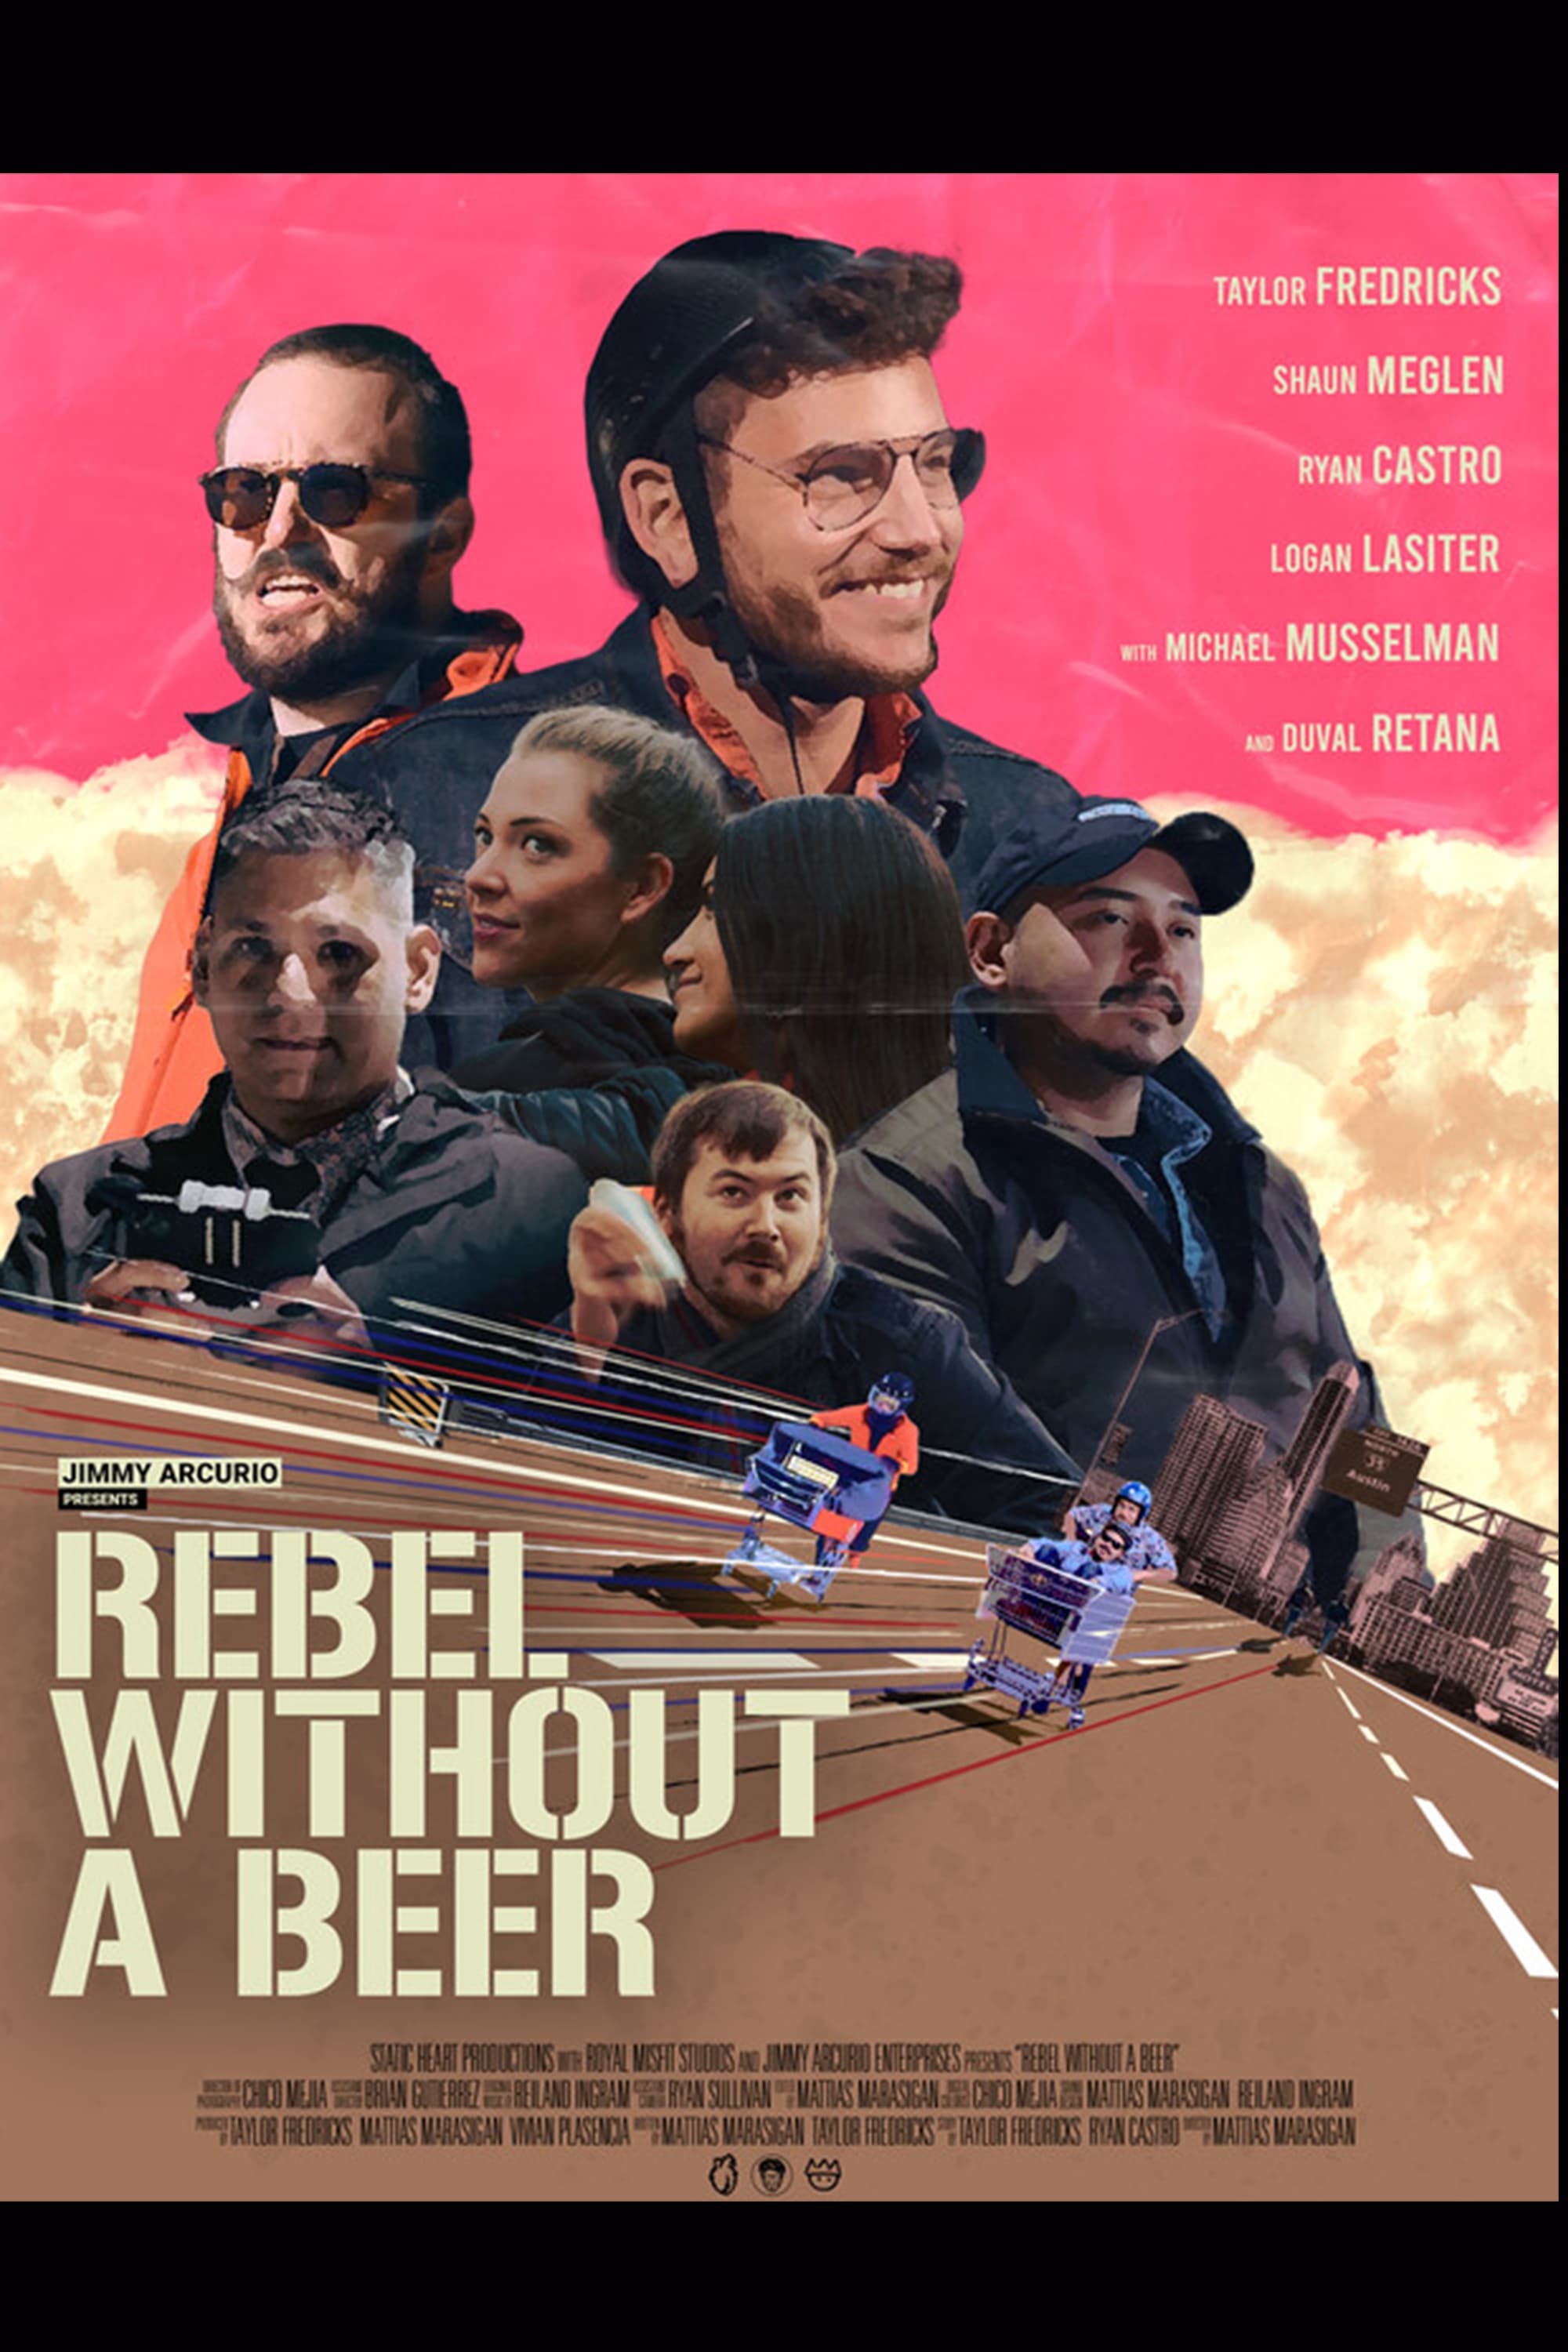 Jimmy Arcurio Presents: Rebel Without A Beer